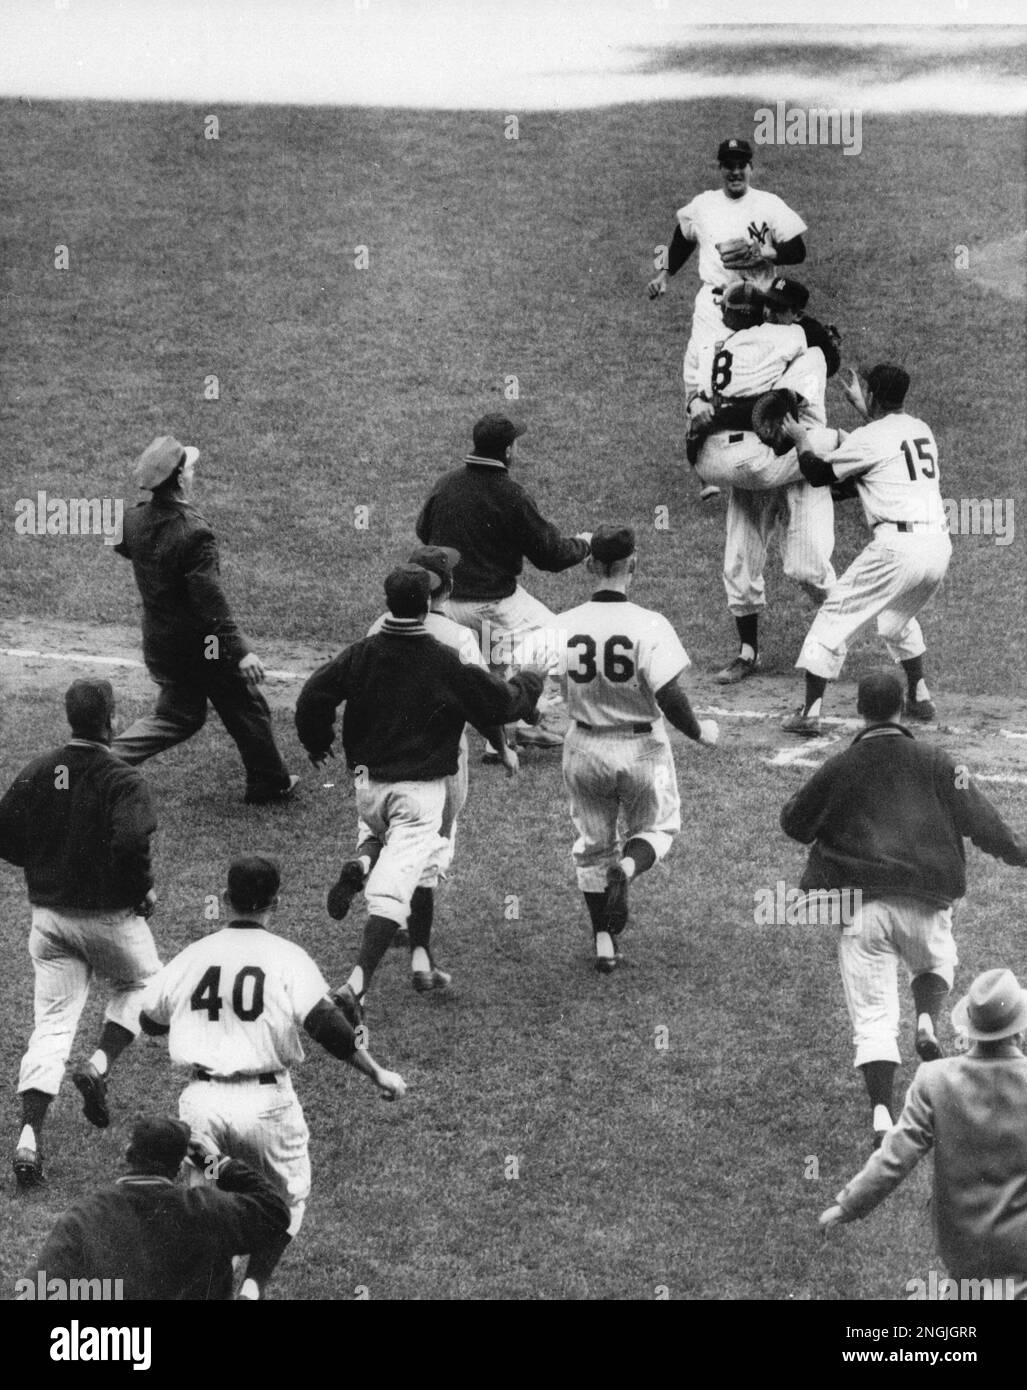 Catcher Yogi Berra (8) has jumped into the arms of pitcher Don